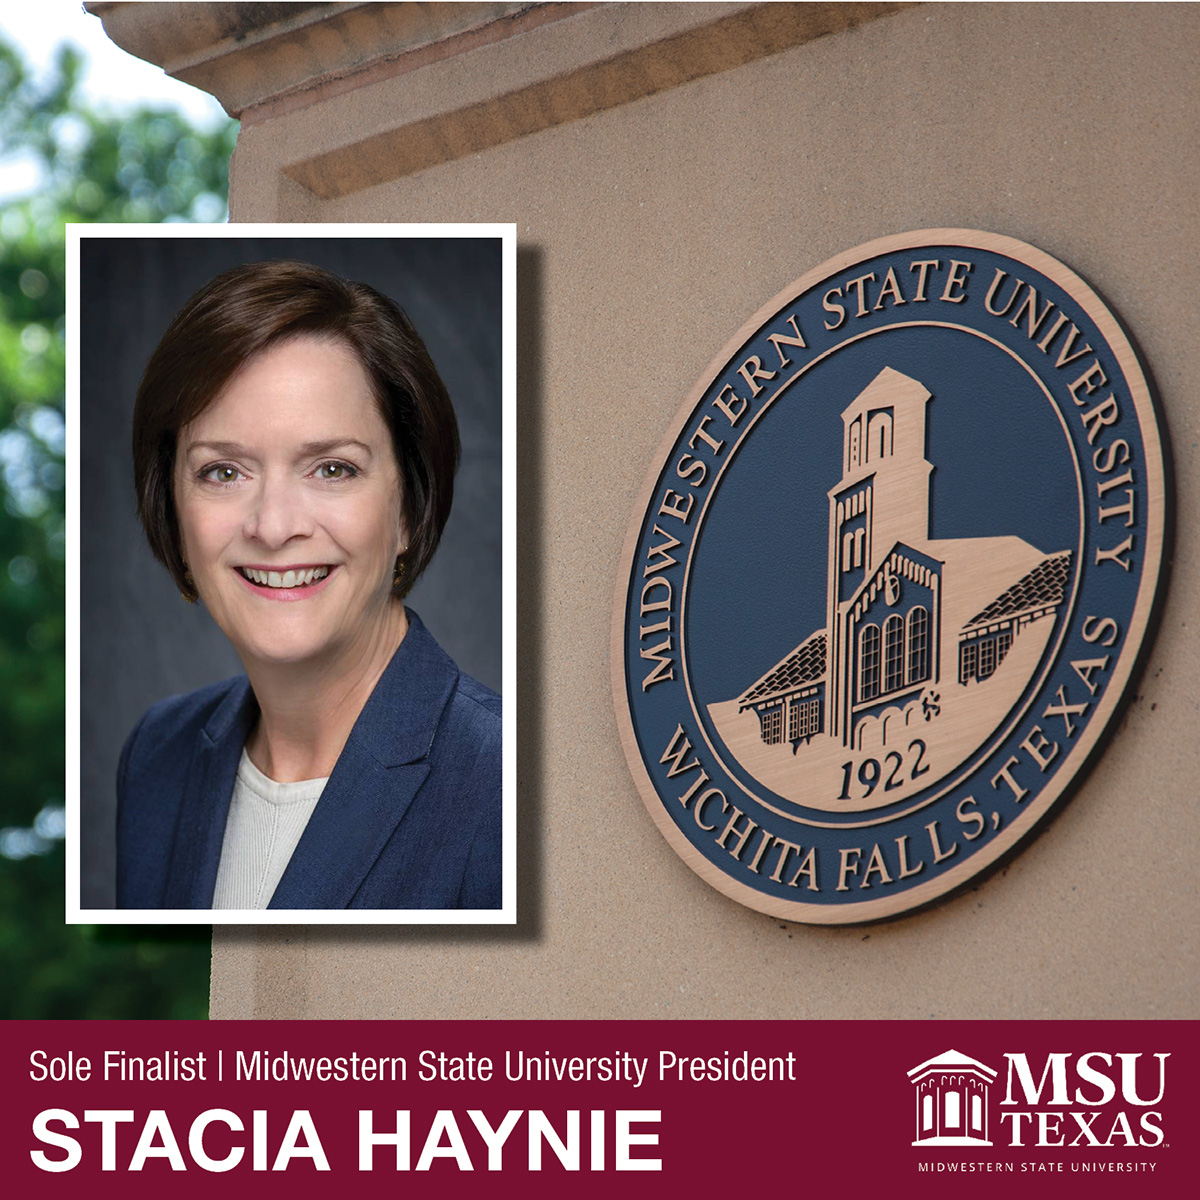 Stacia Haynie, sole finalist for MSU Texas President, graphic with maroon bar at bottom below picture